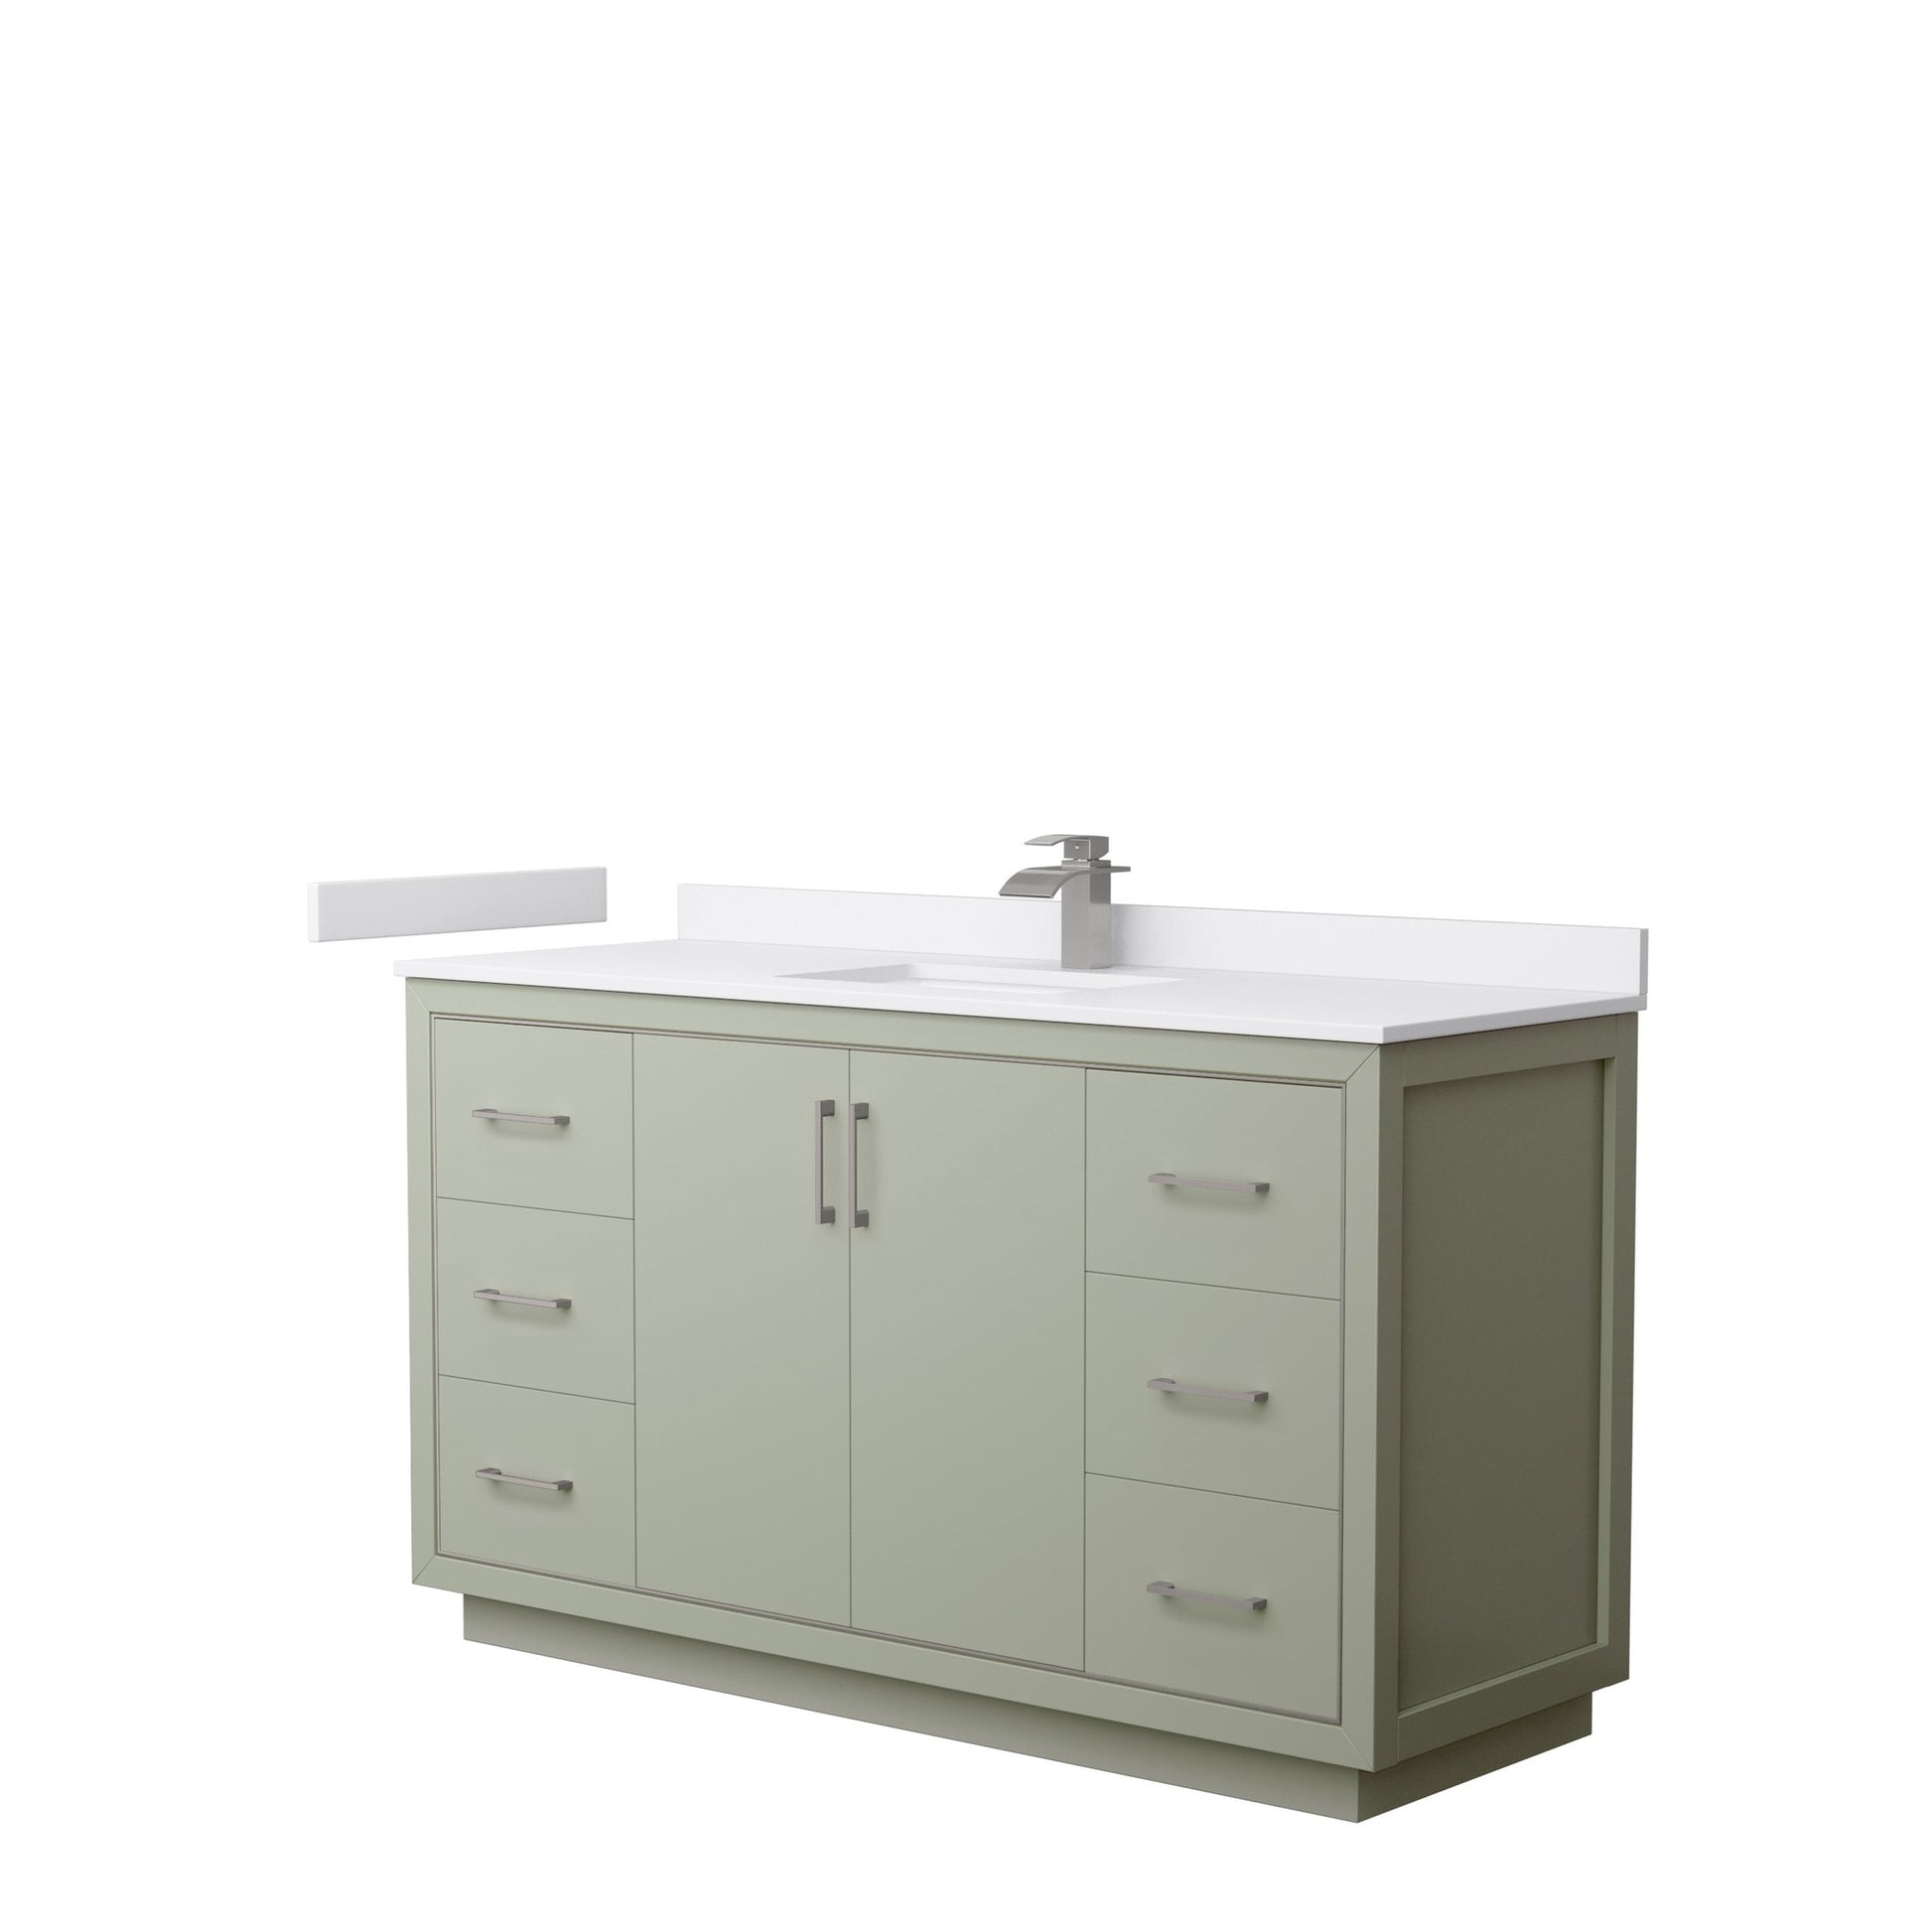 Wyndham Collection Icon 60" Single Bathroom Vanity in Light Green, White Cultured Marble Countertop, Undermount Square Sink, Brushed Nickel Trim